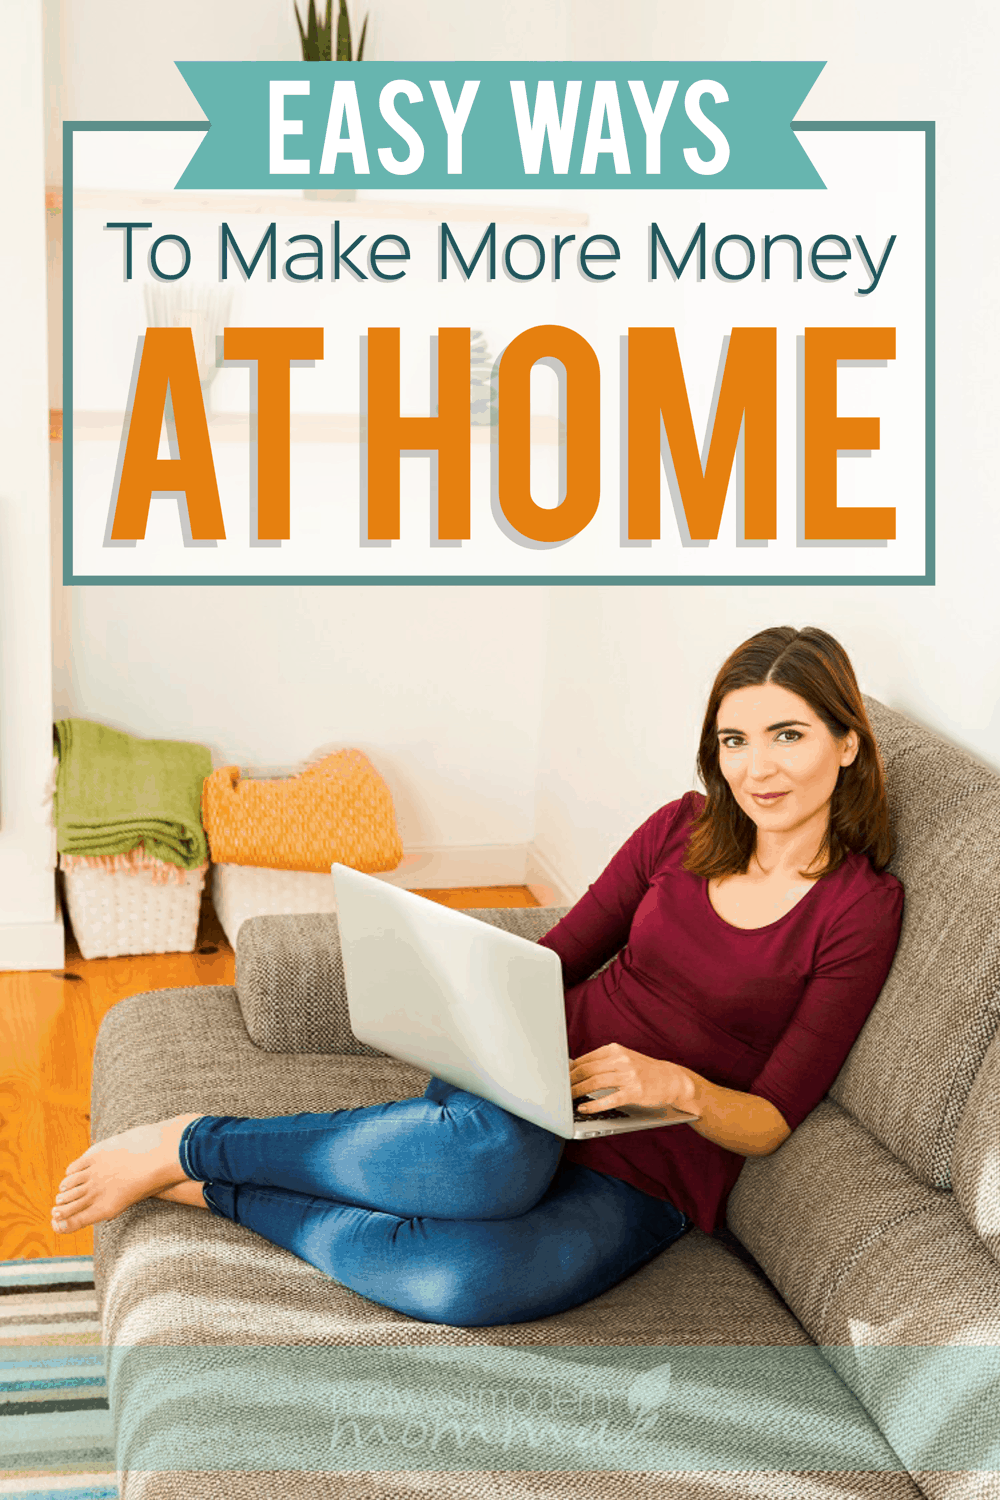 5 Ways to Make Money Online From Home